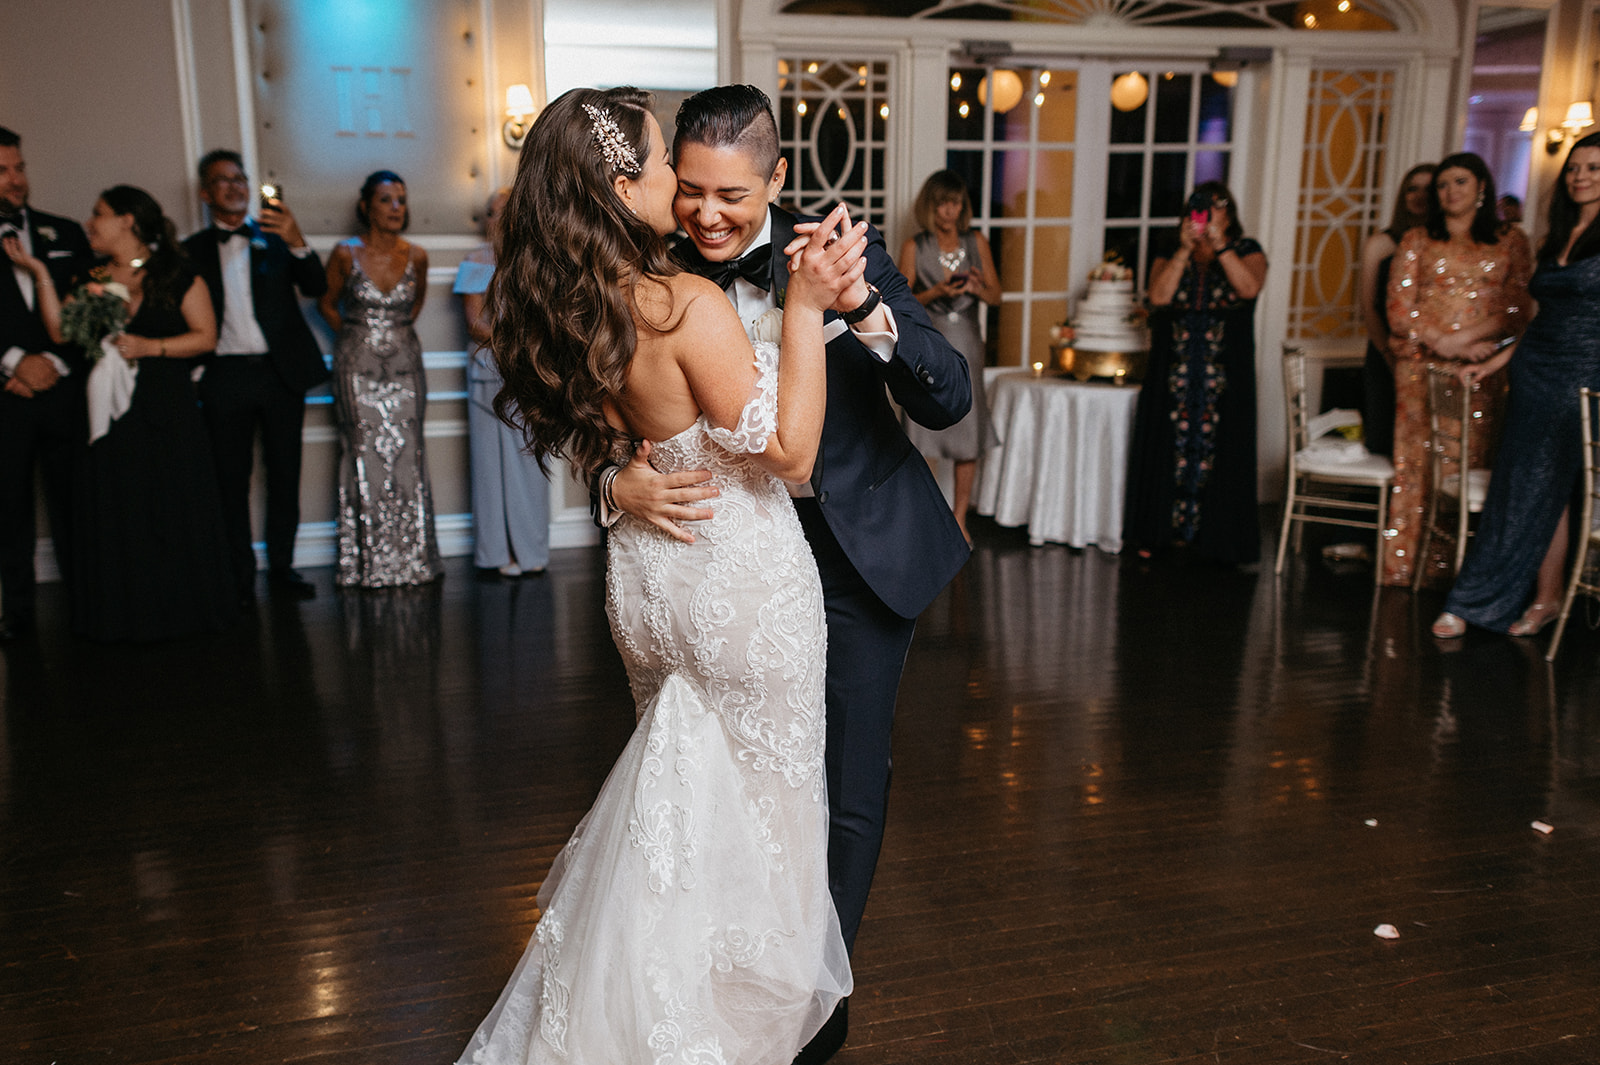 Couple shares first dance during wedding reception at Briarcliff Manor